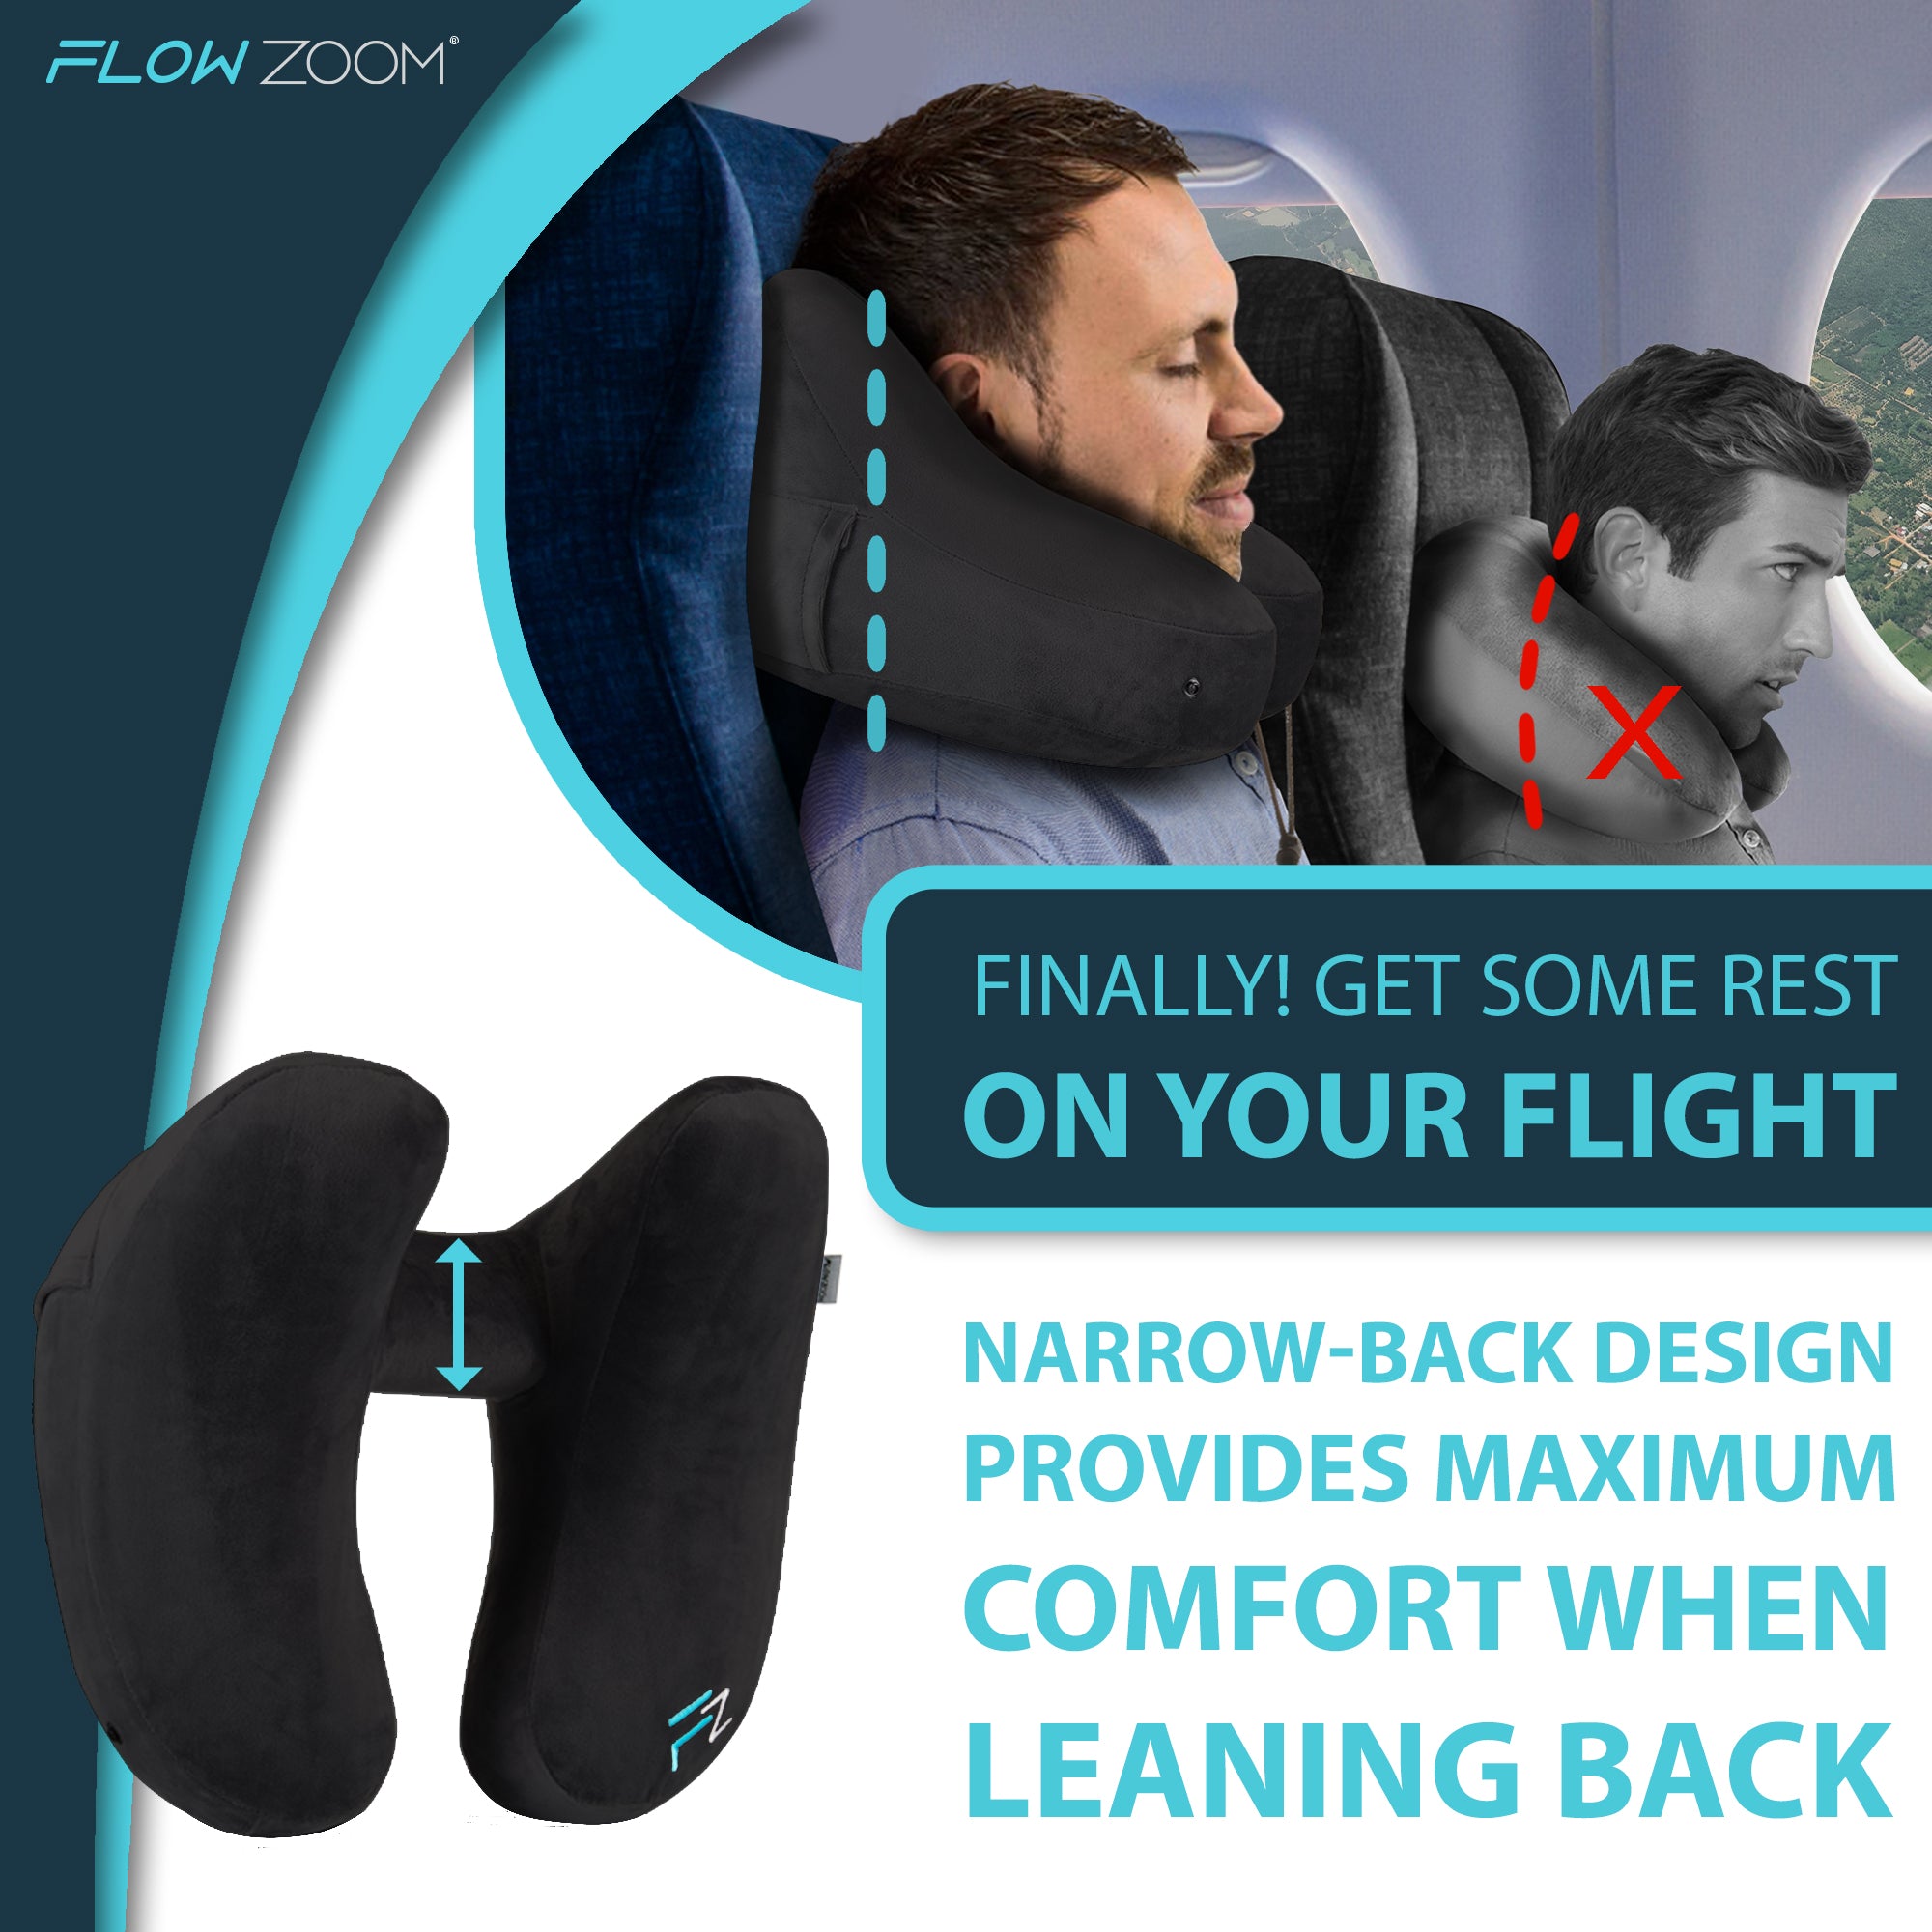 Airplane cushion with narrow-back design